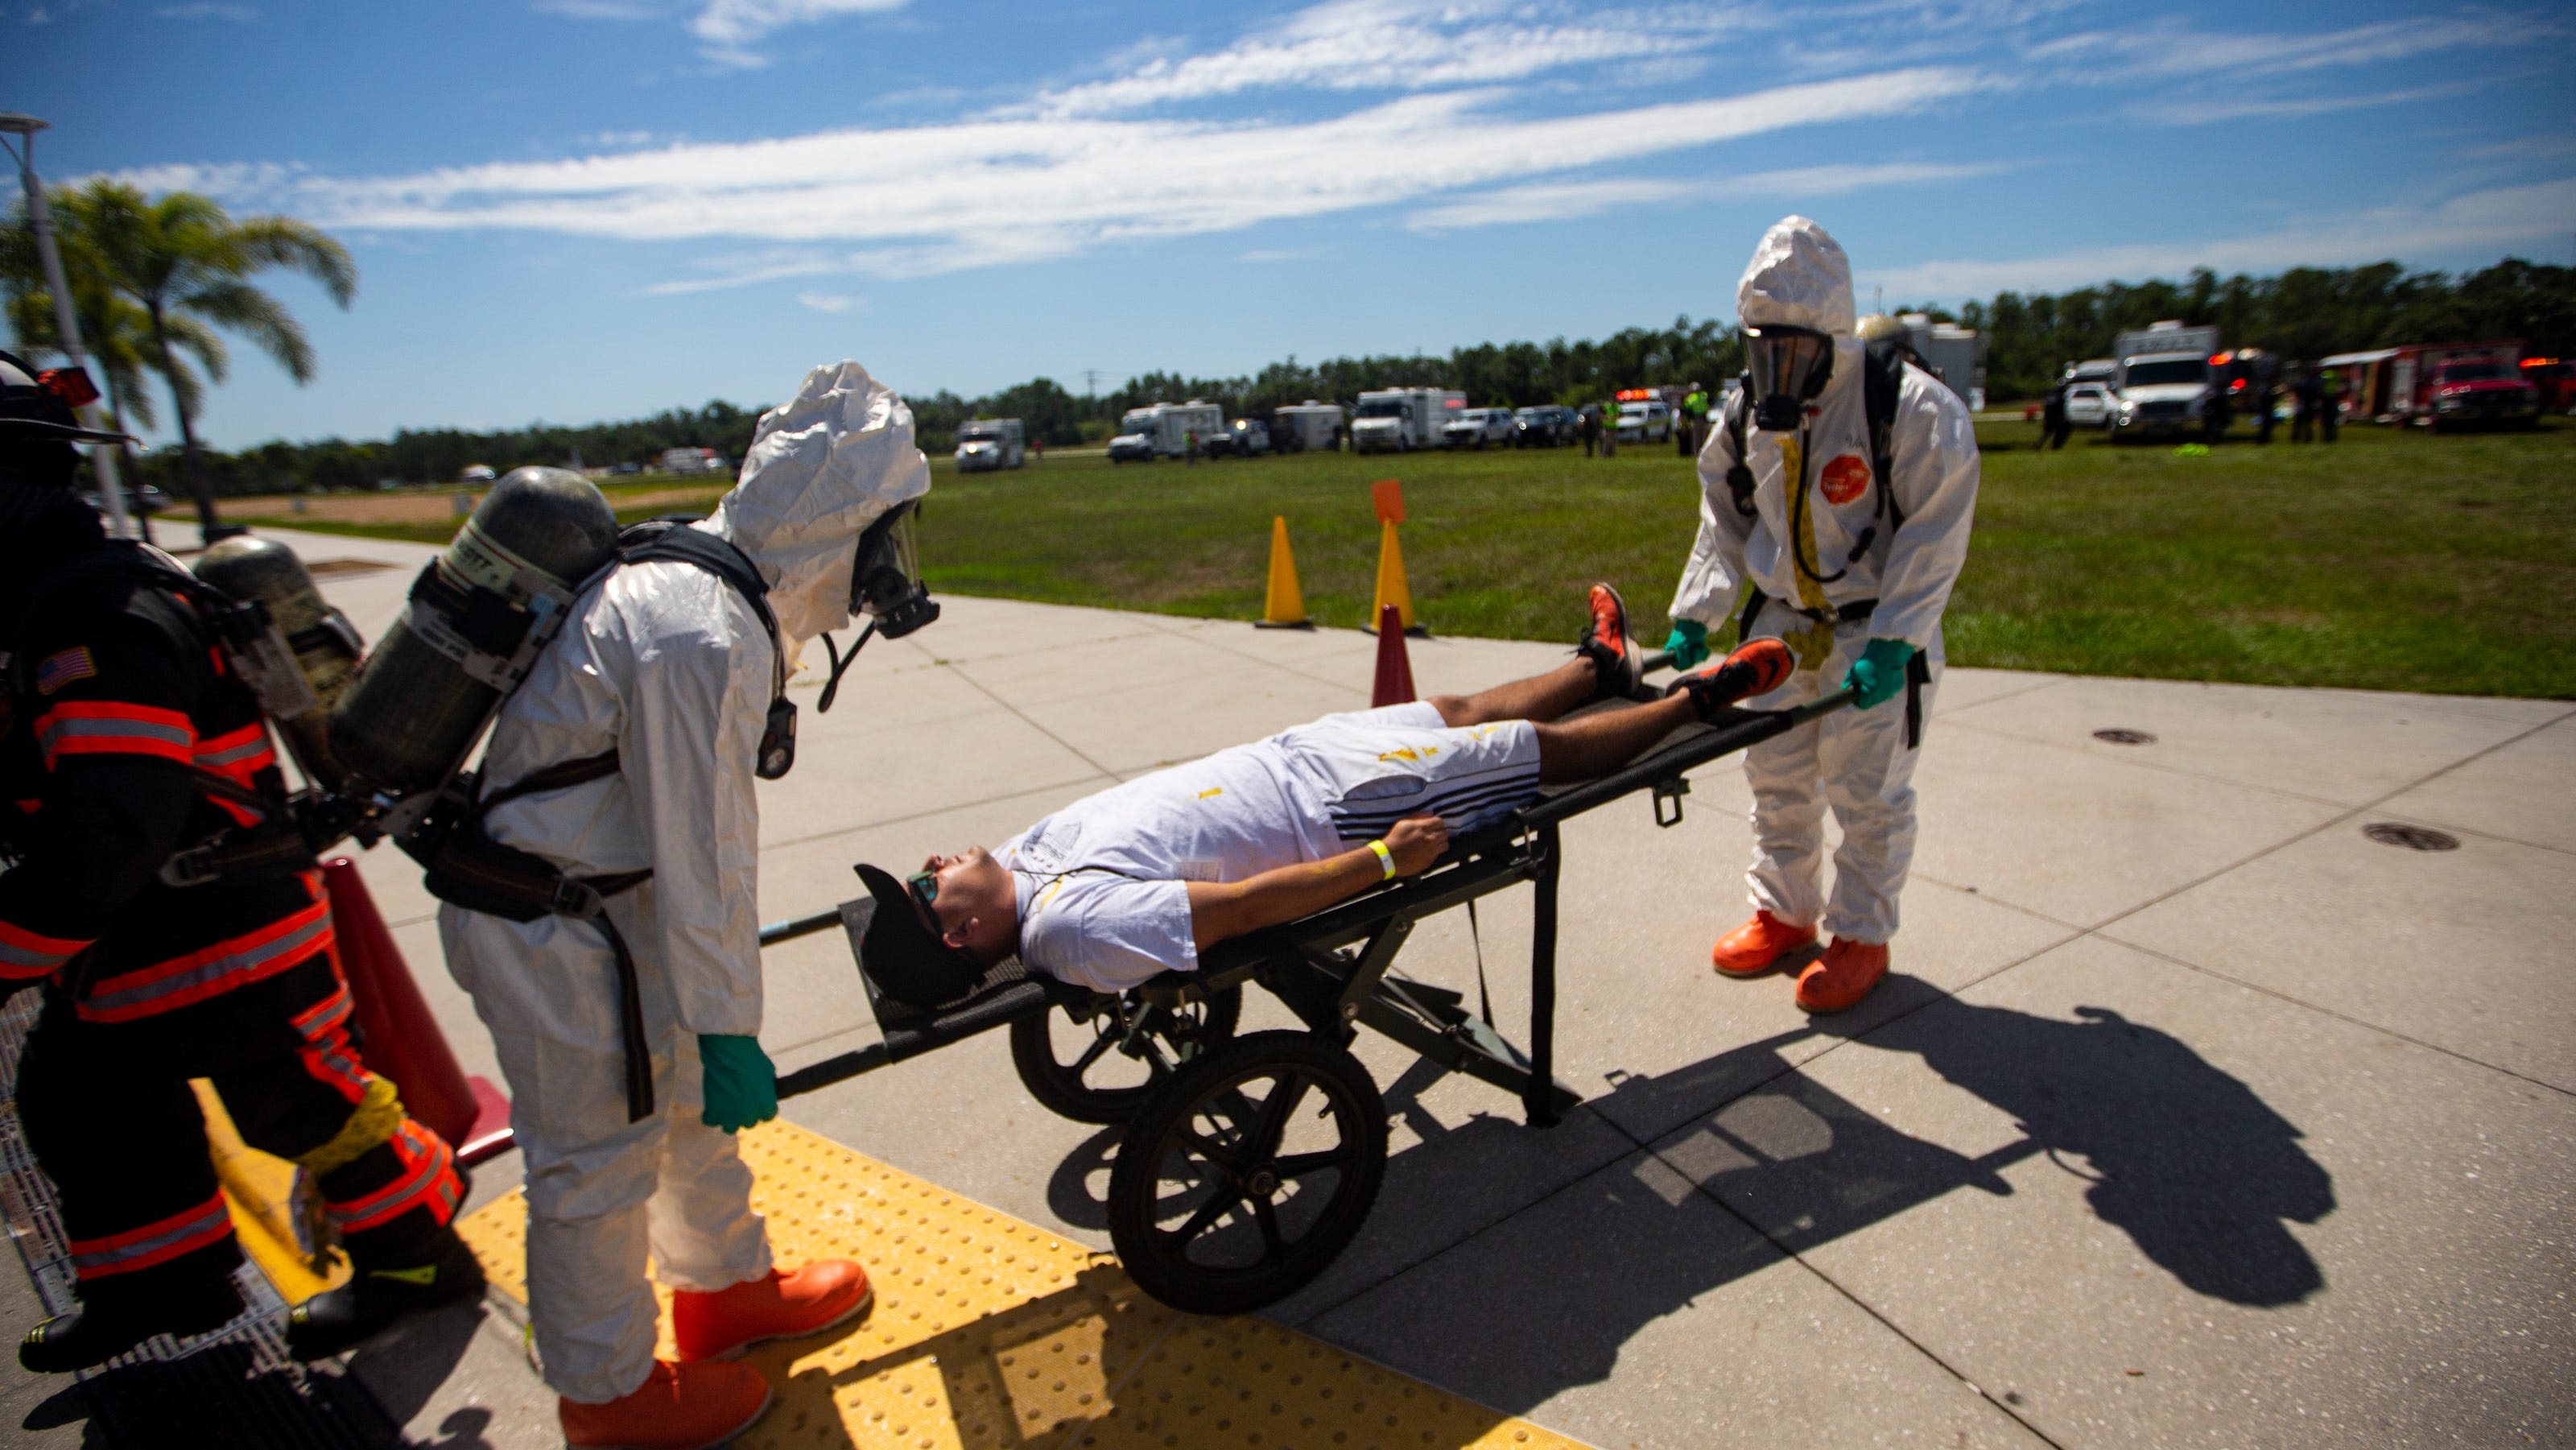 First reponders from 46 agencies take part in mass casualty training exercise at JetBlue Park